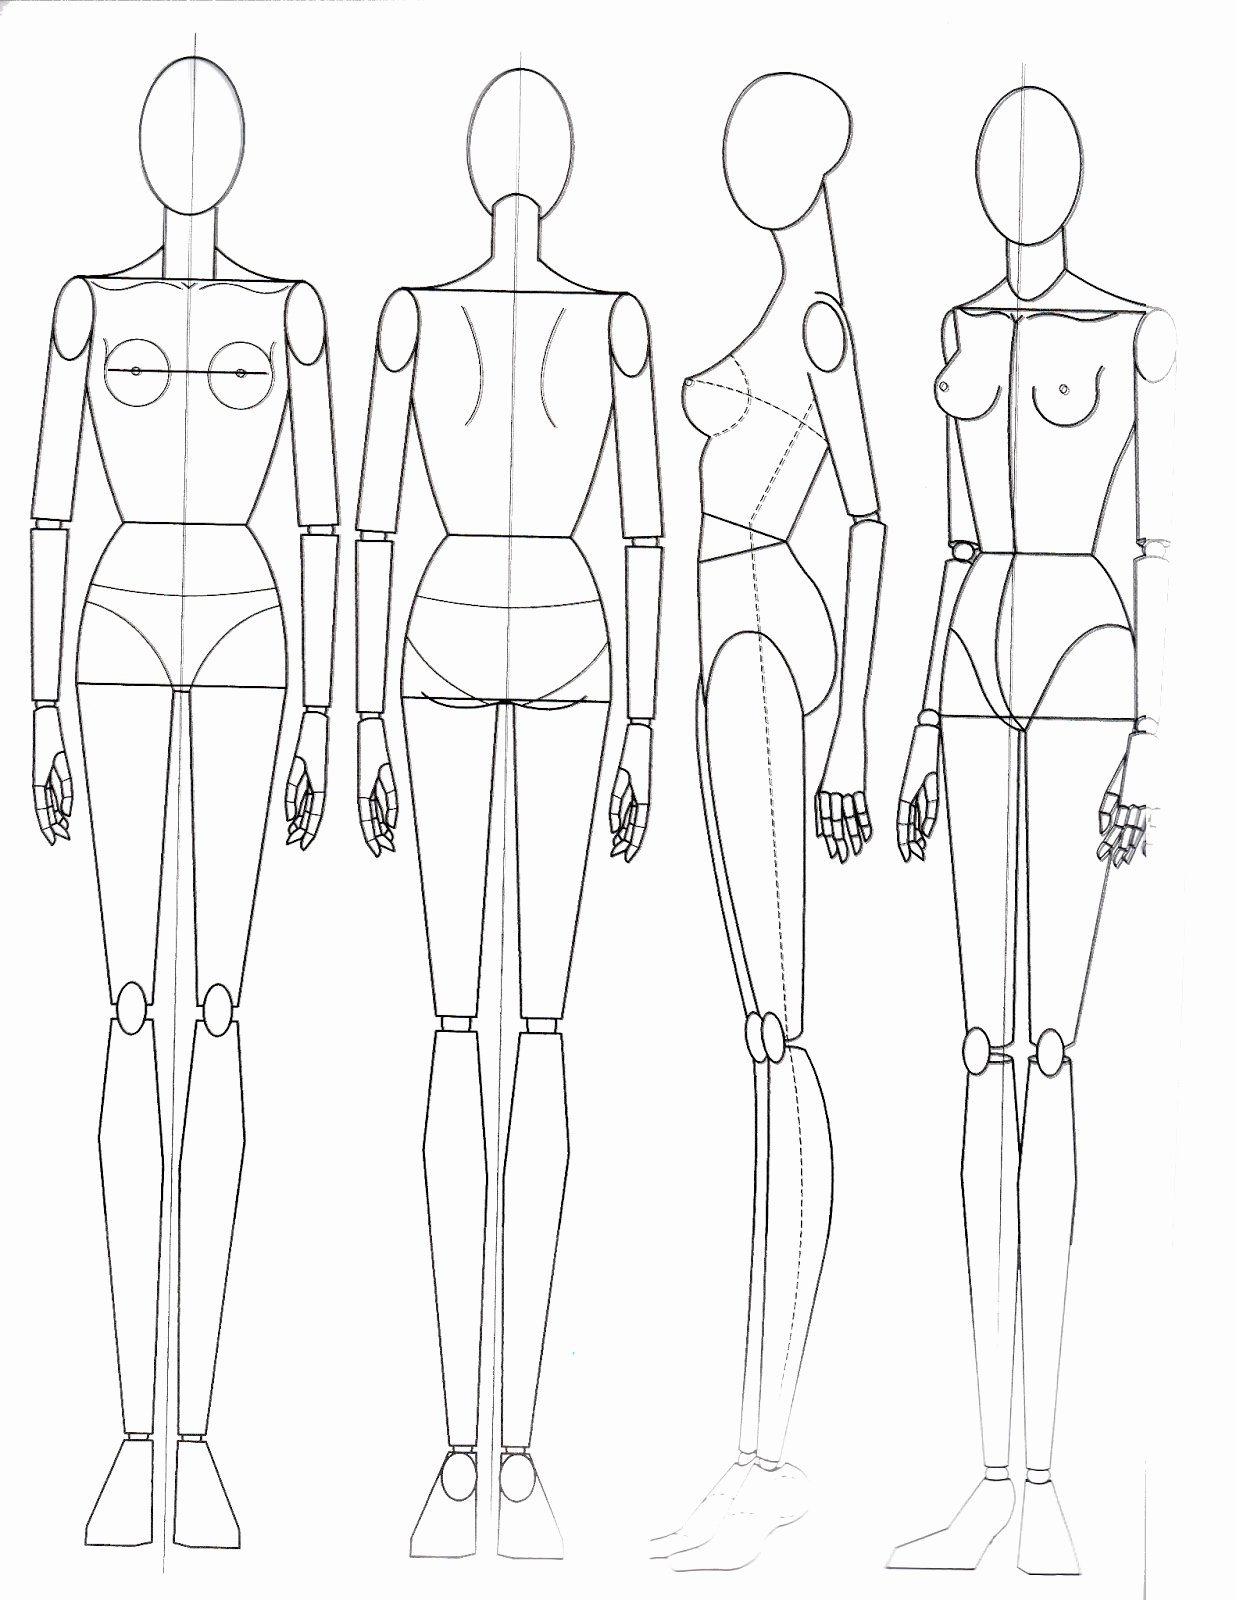 Model Sketches Template Lovely 1000 Images About Reference On Pinterest